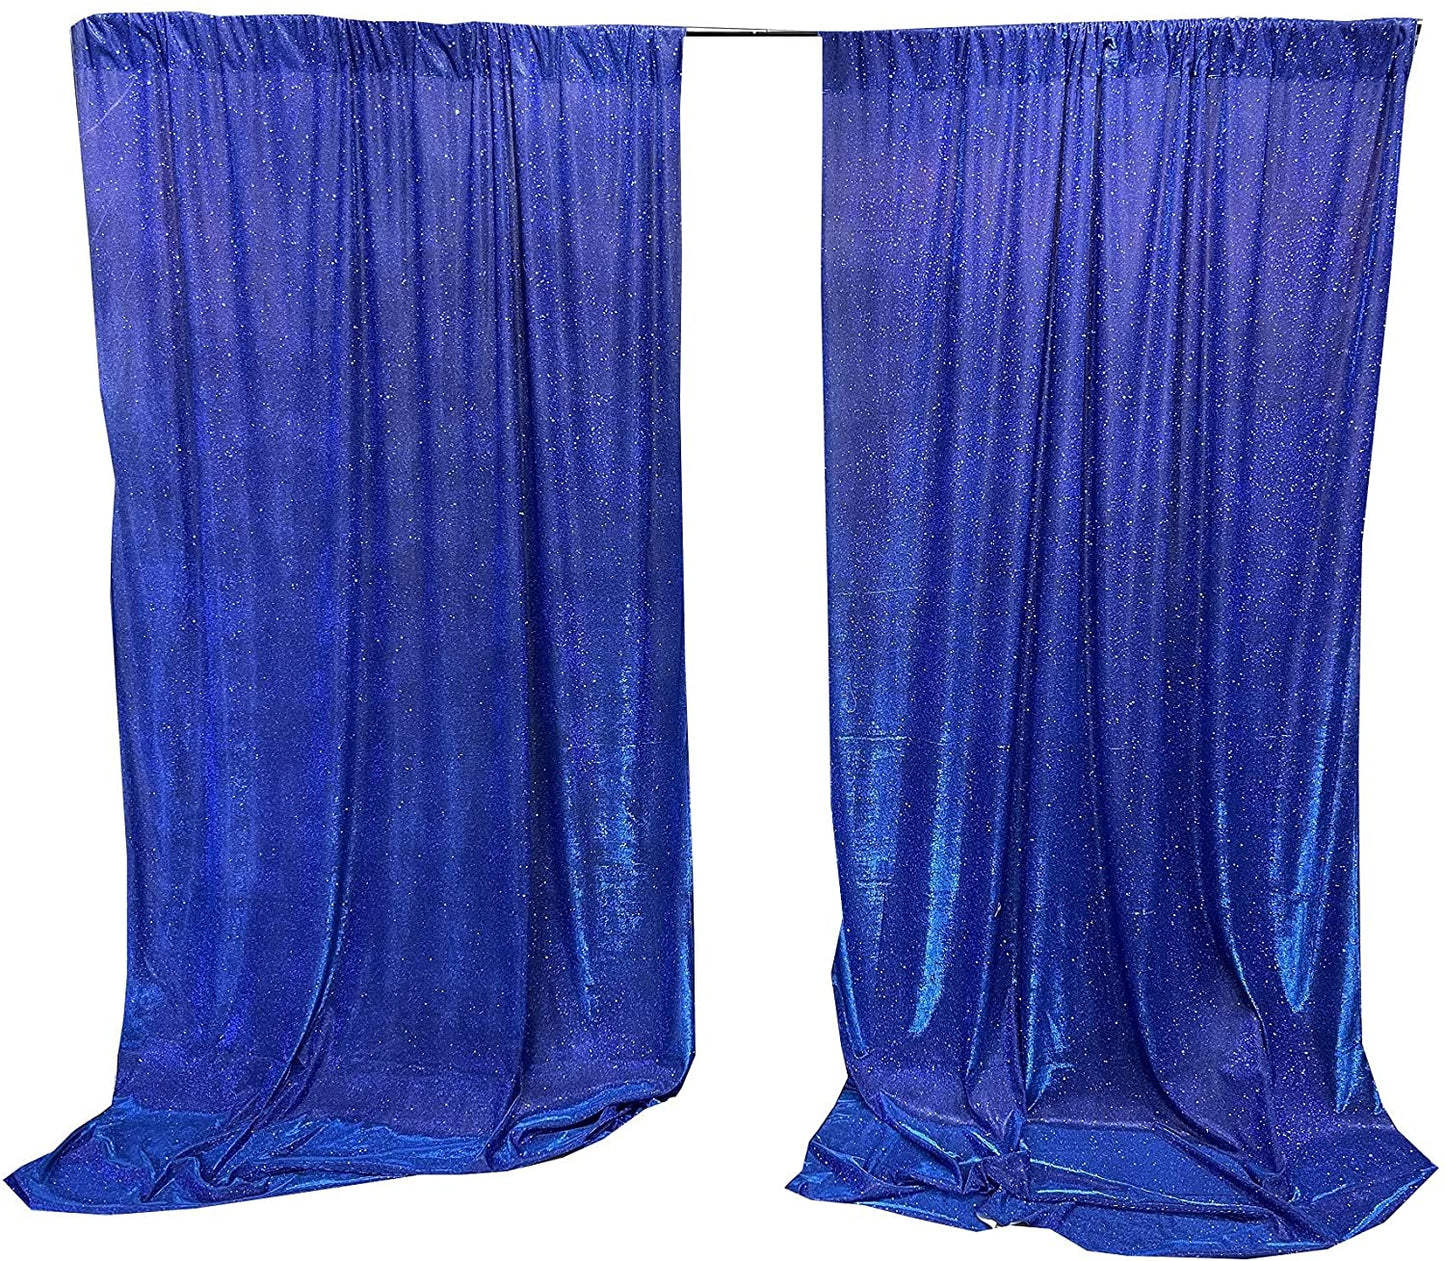 Full Covered Glitter Shimmer on Fabric Backdrop Drape - Curtain - Wedding Party Decoration (2 Panels Royal